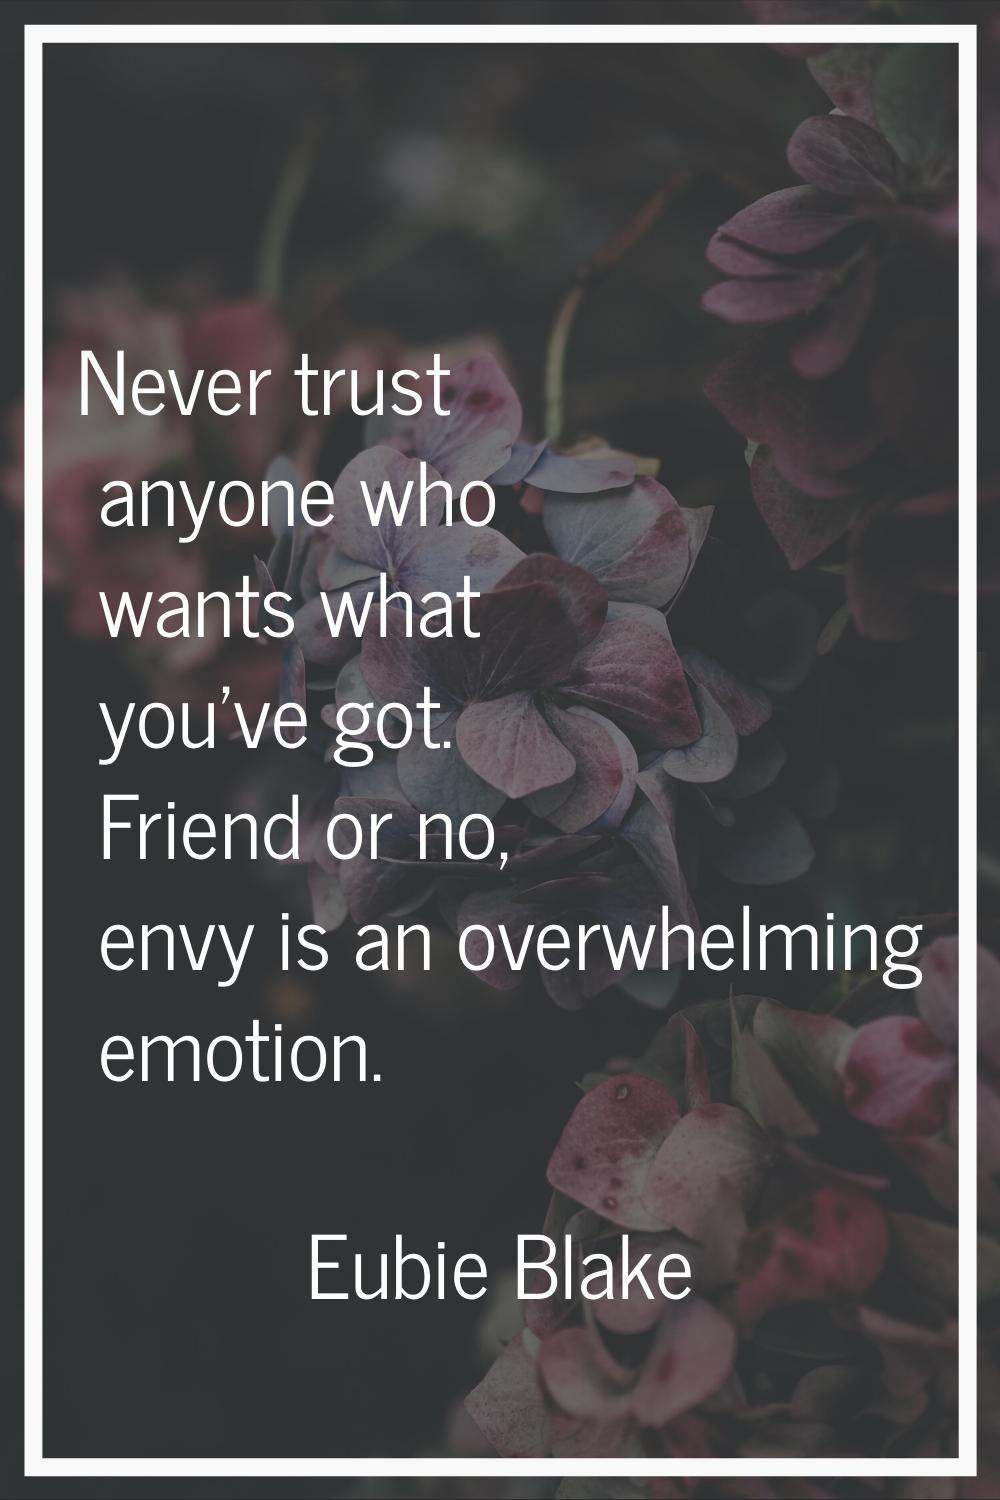 Never trust anyone who wants what you've got. Friend or no, envy is an overwhelming emotion.